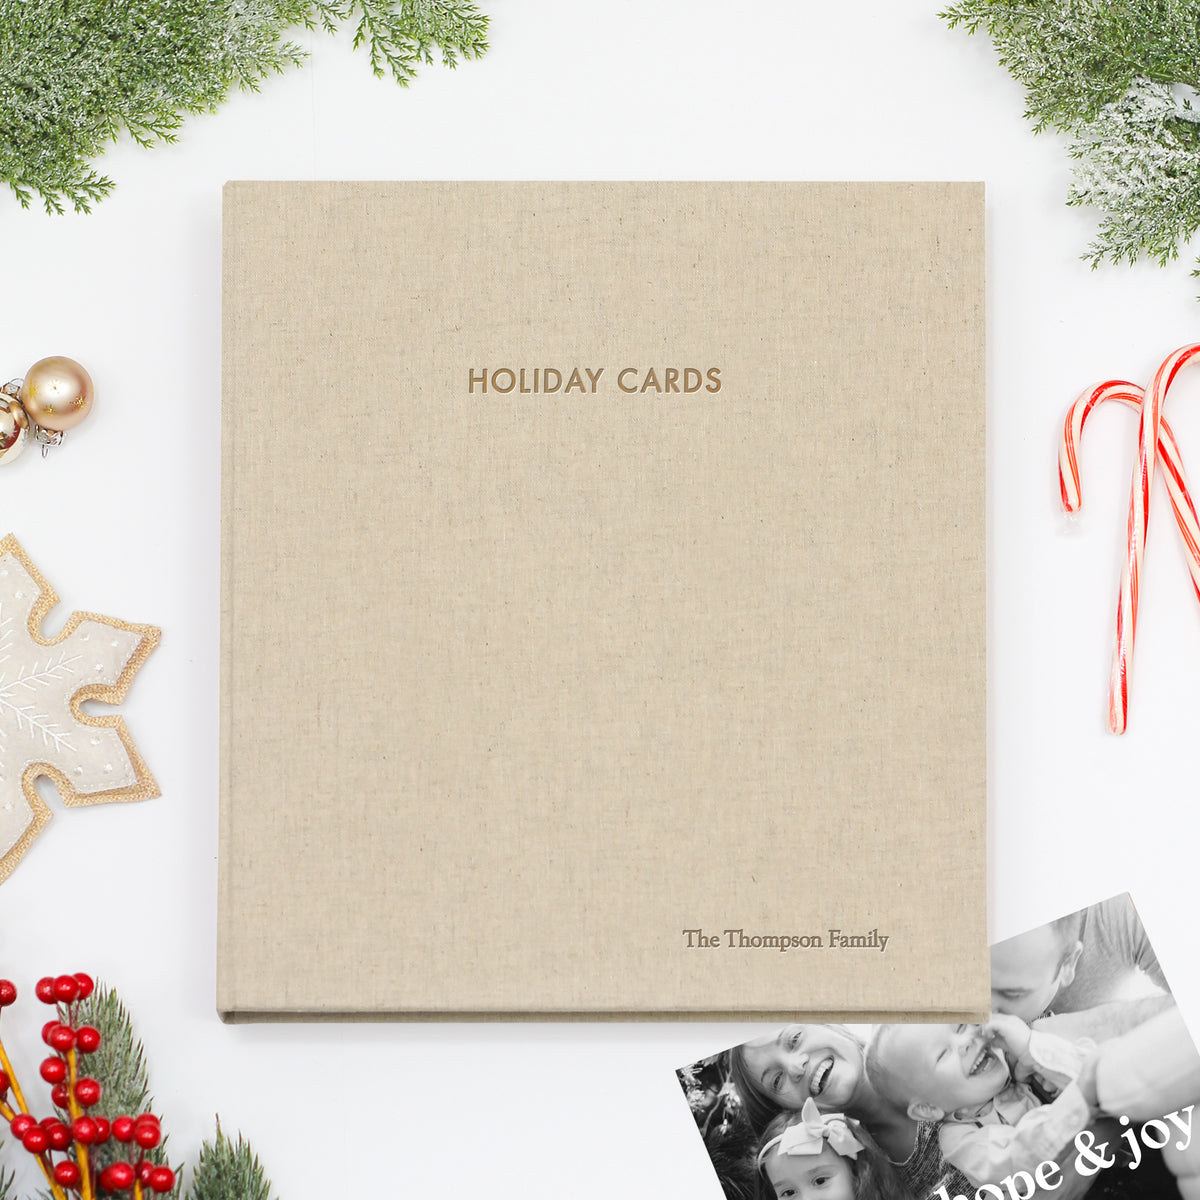 Holiday Card Album | Cover: Natural Linen | Embossed with “Holiday Cards” | Available Personalized